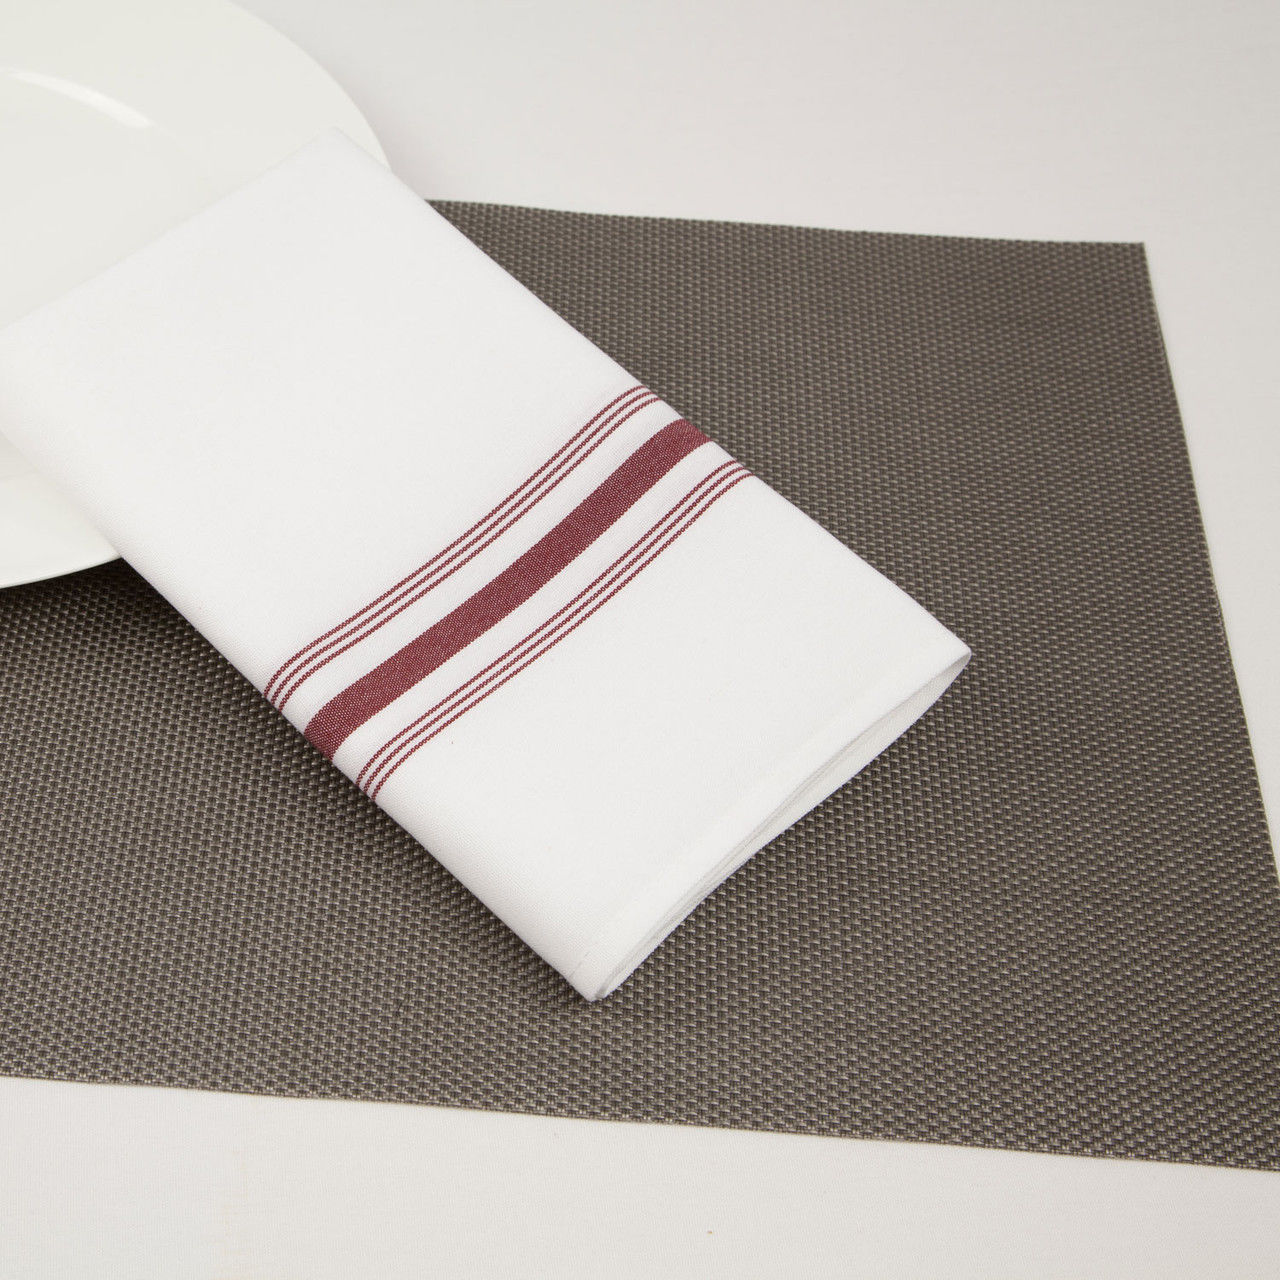 What are the key features of Riegel's Vinyl Woven Placemats?